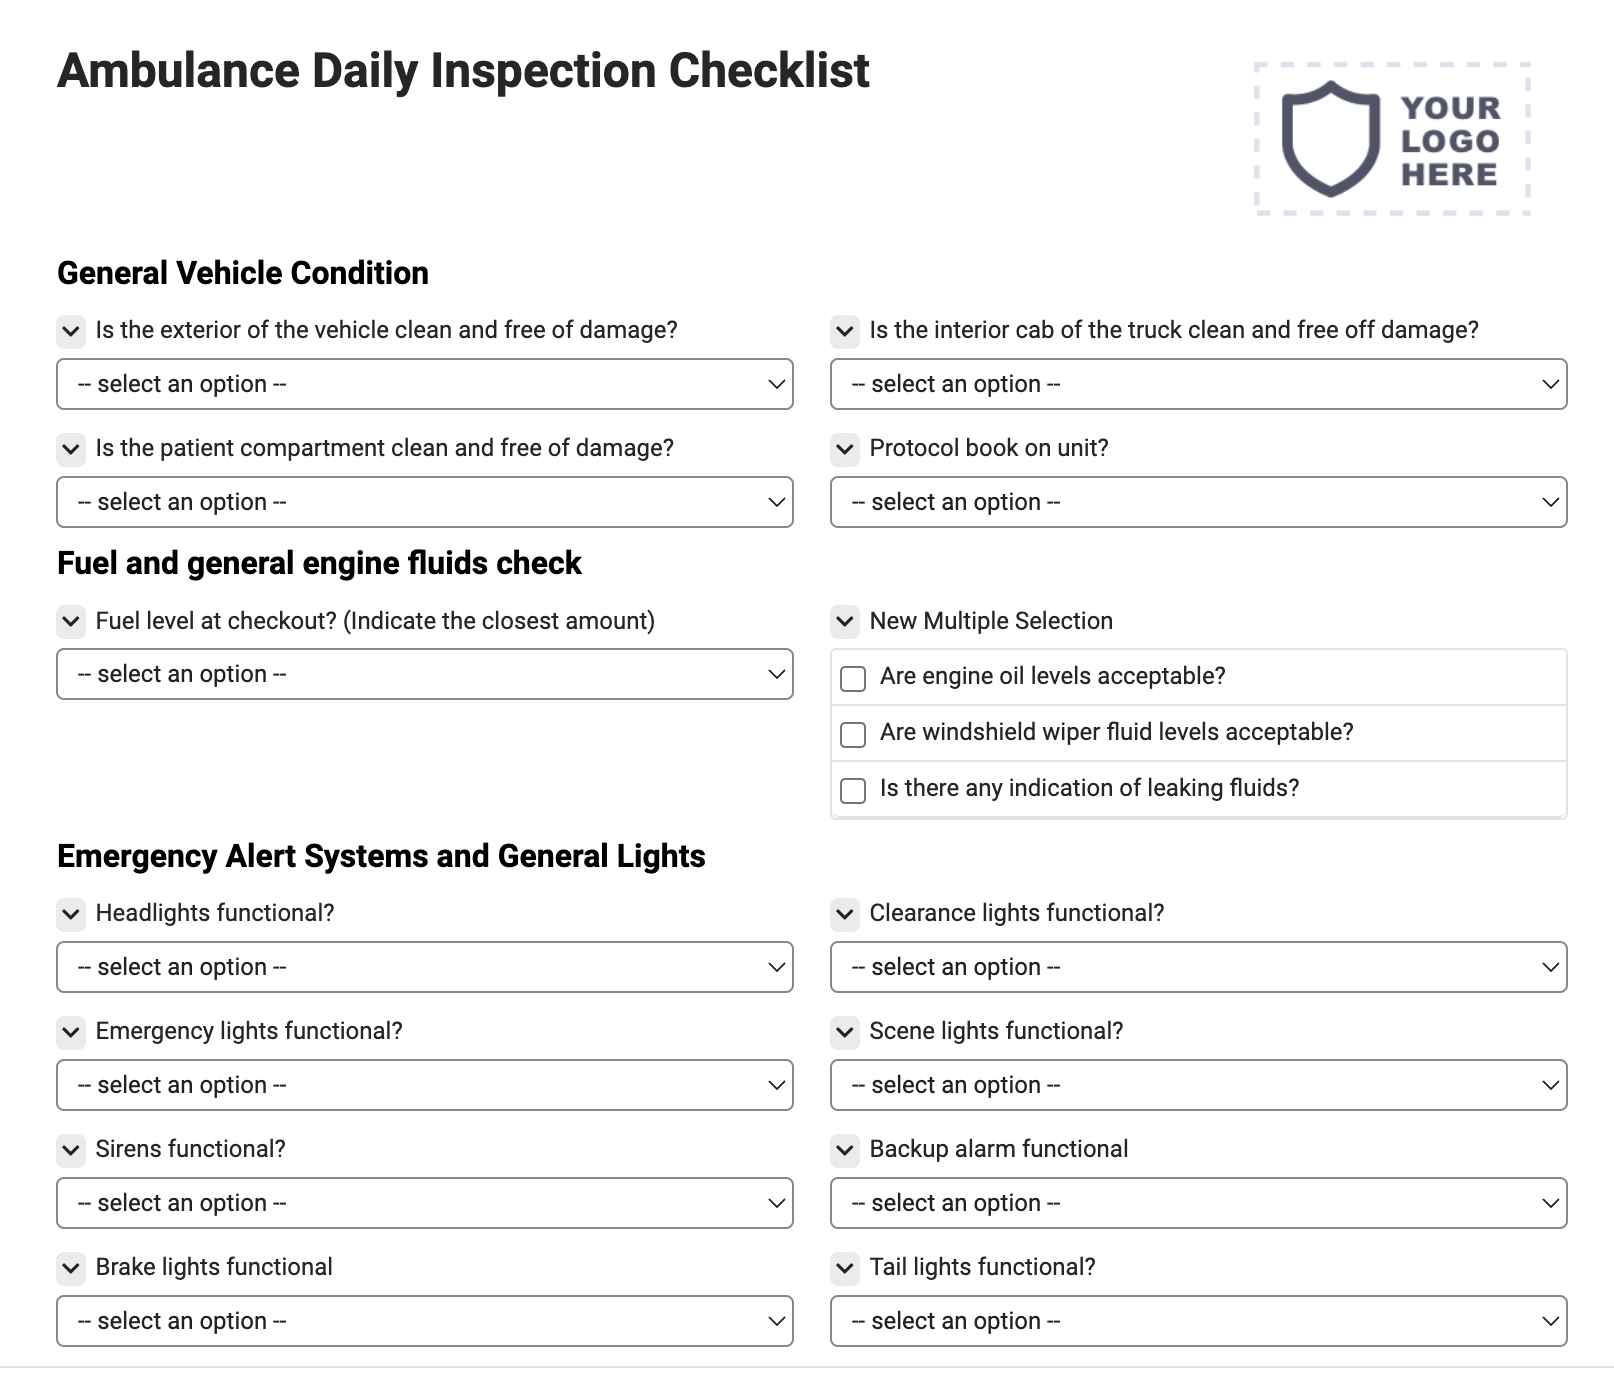 Ambulance Daily Inspection Checklist